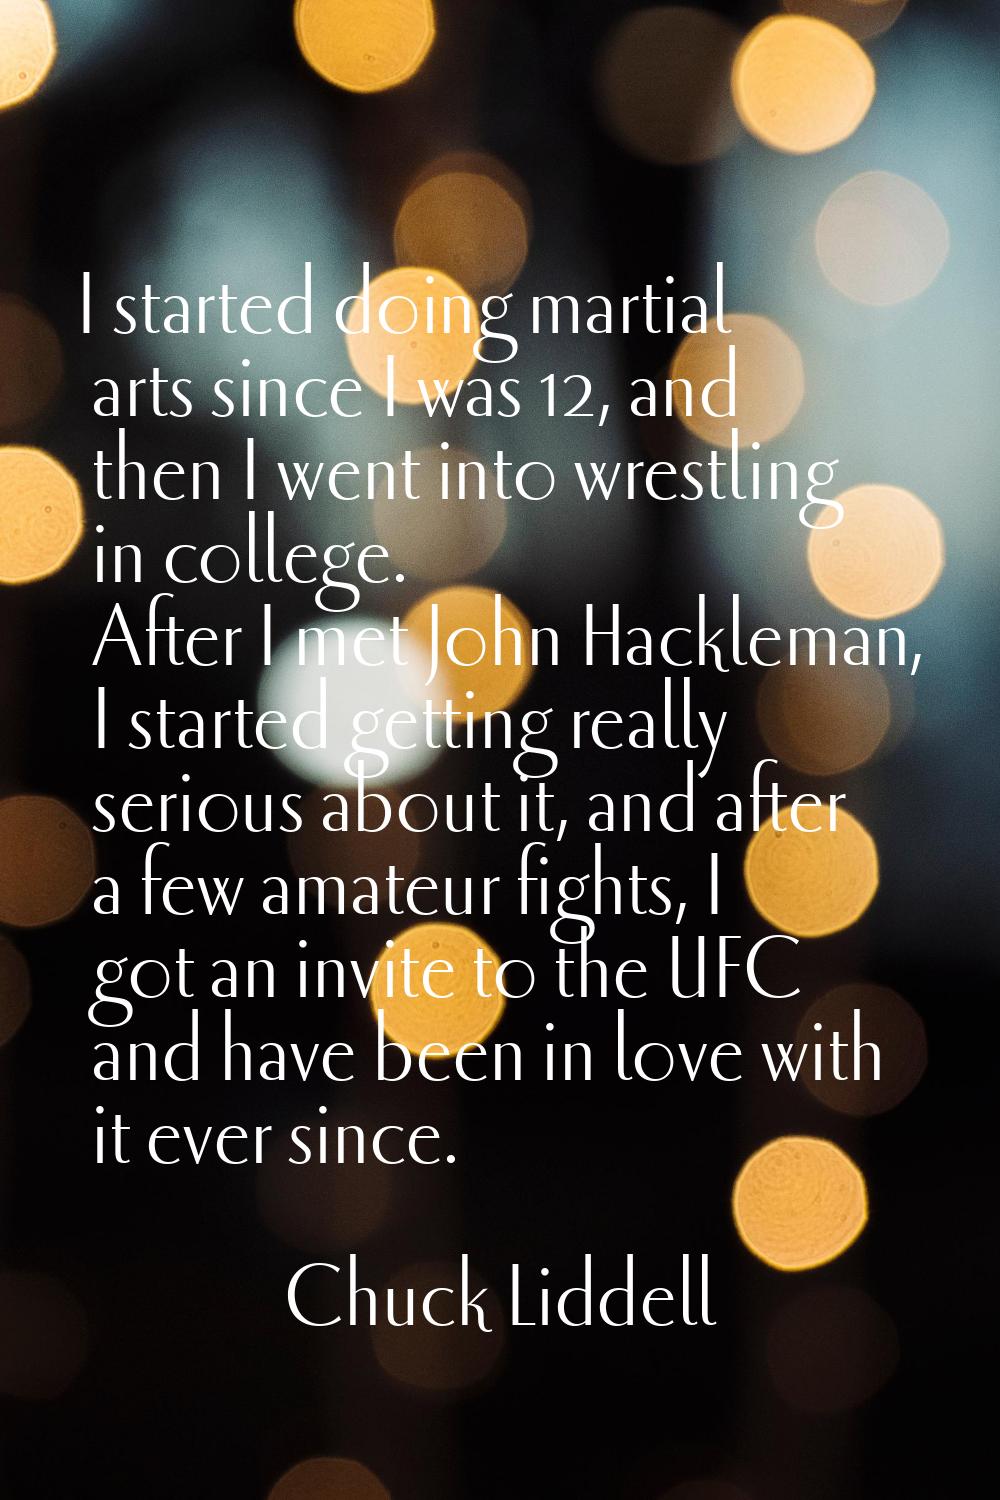 I started doing martial arts since I was 12, and then I went into wrestling in college. After I met